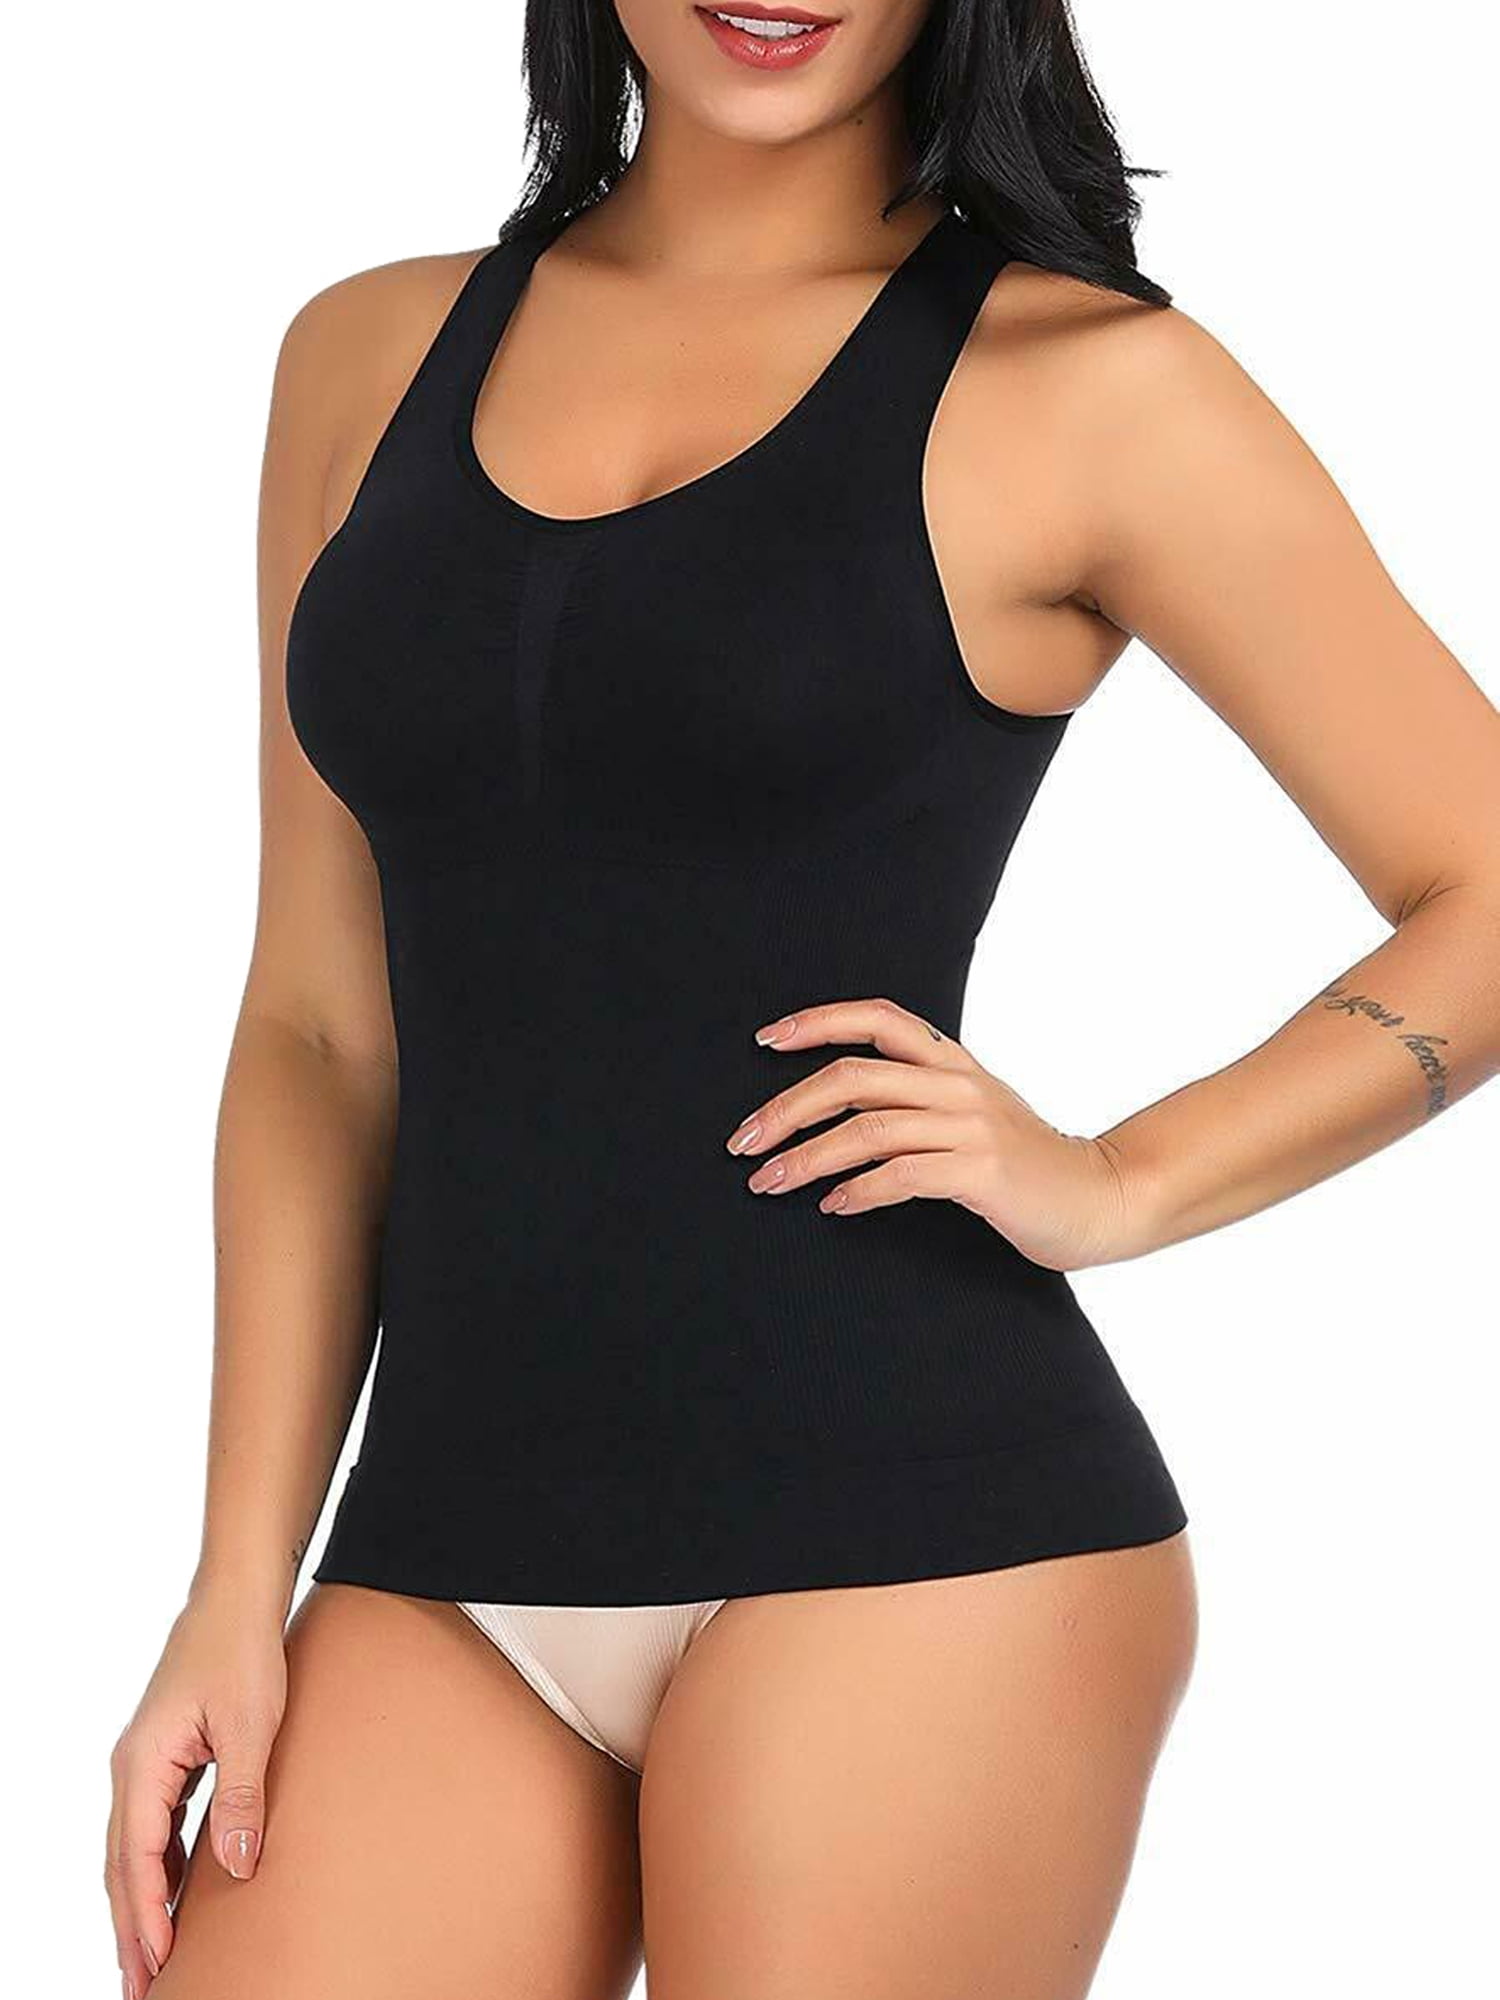 TOMDUGIA Women Compression Camisole with Built in Removable Bra Pads Body  Shaper Tank Top